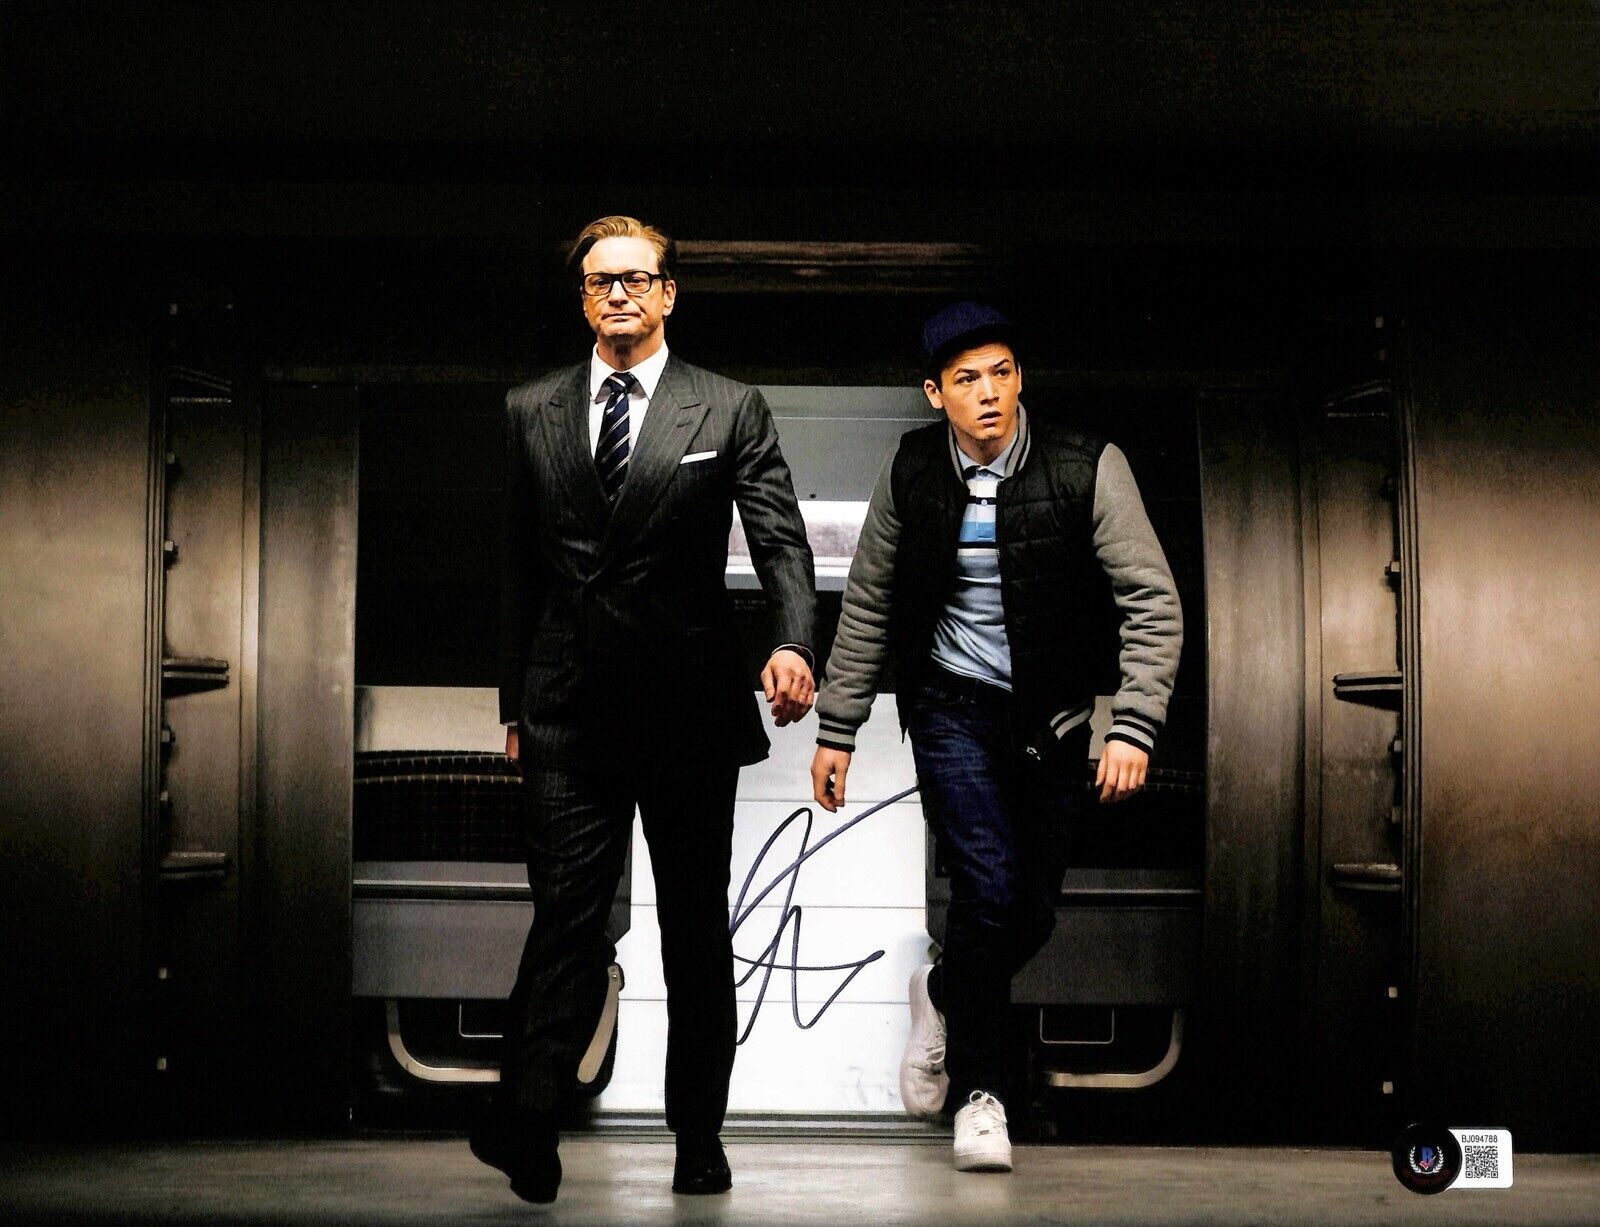 Colin Firth Kingsman Signed 11x14 Photograph BECKETT (Grad Collection)